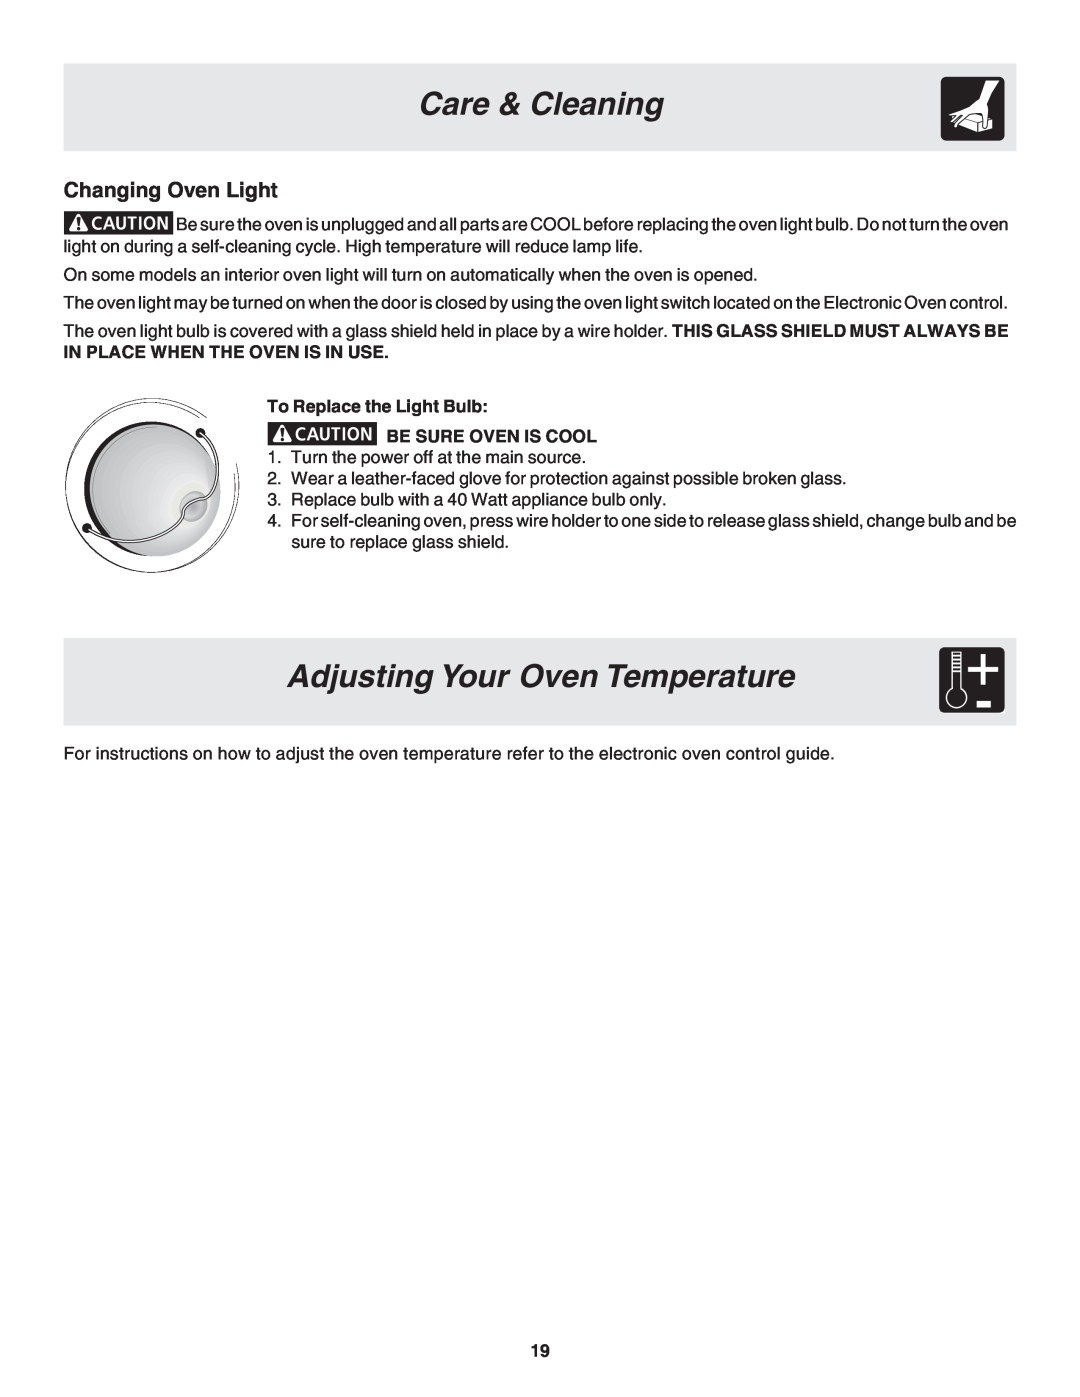 Frigidaire 318203866 warranty Adjusting Your Oven Temperature, Care & Cleaning, Changing Oven Light, Be Sure Oven Is Cool 